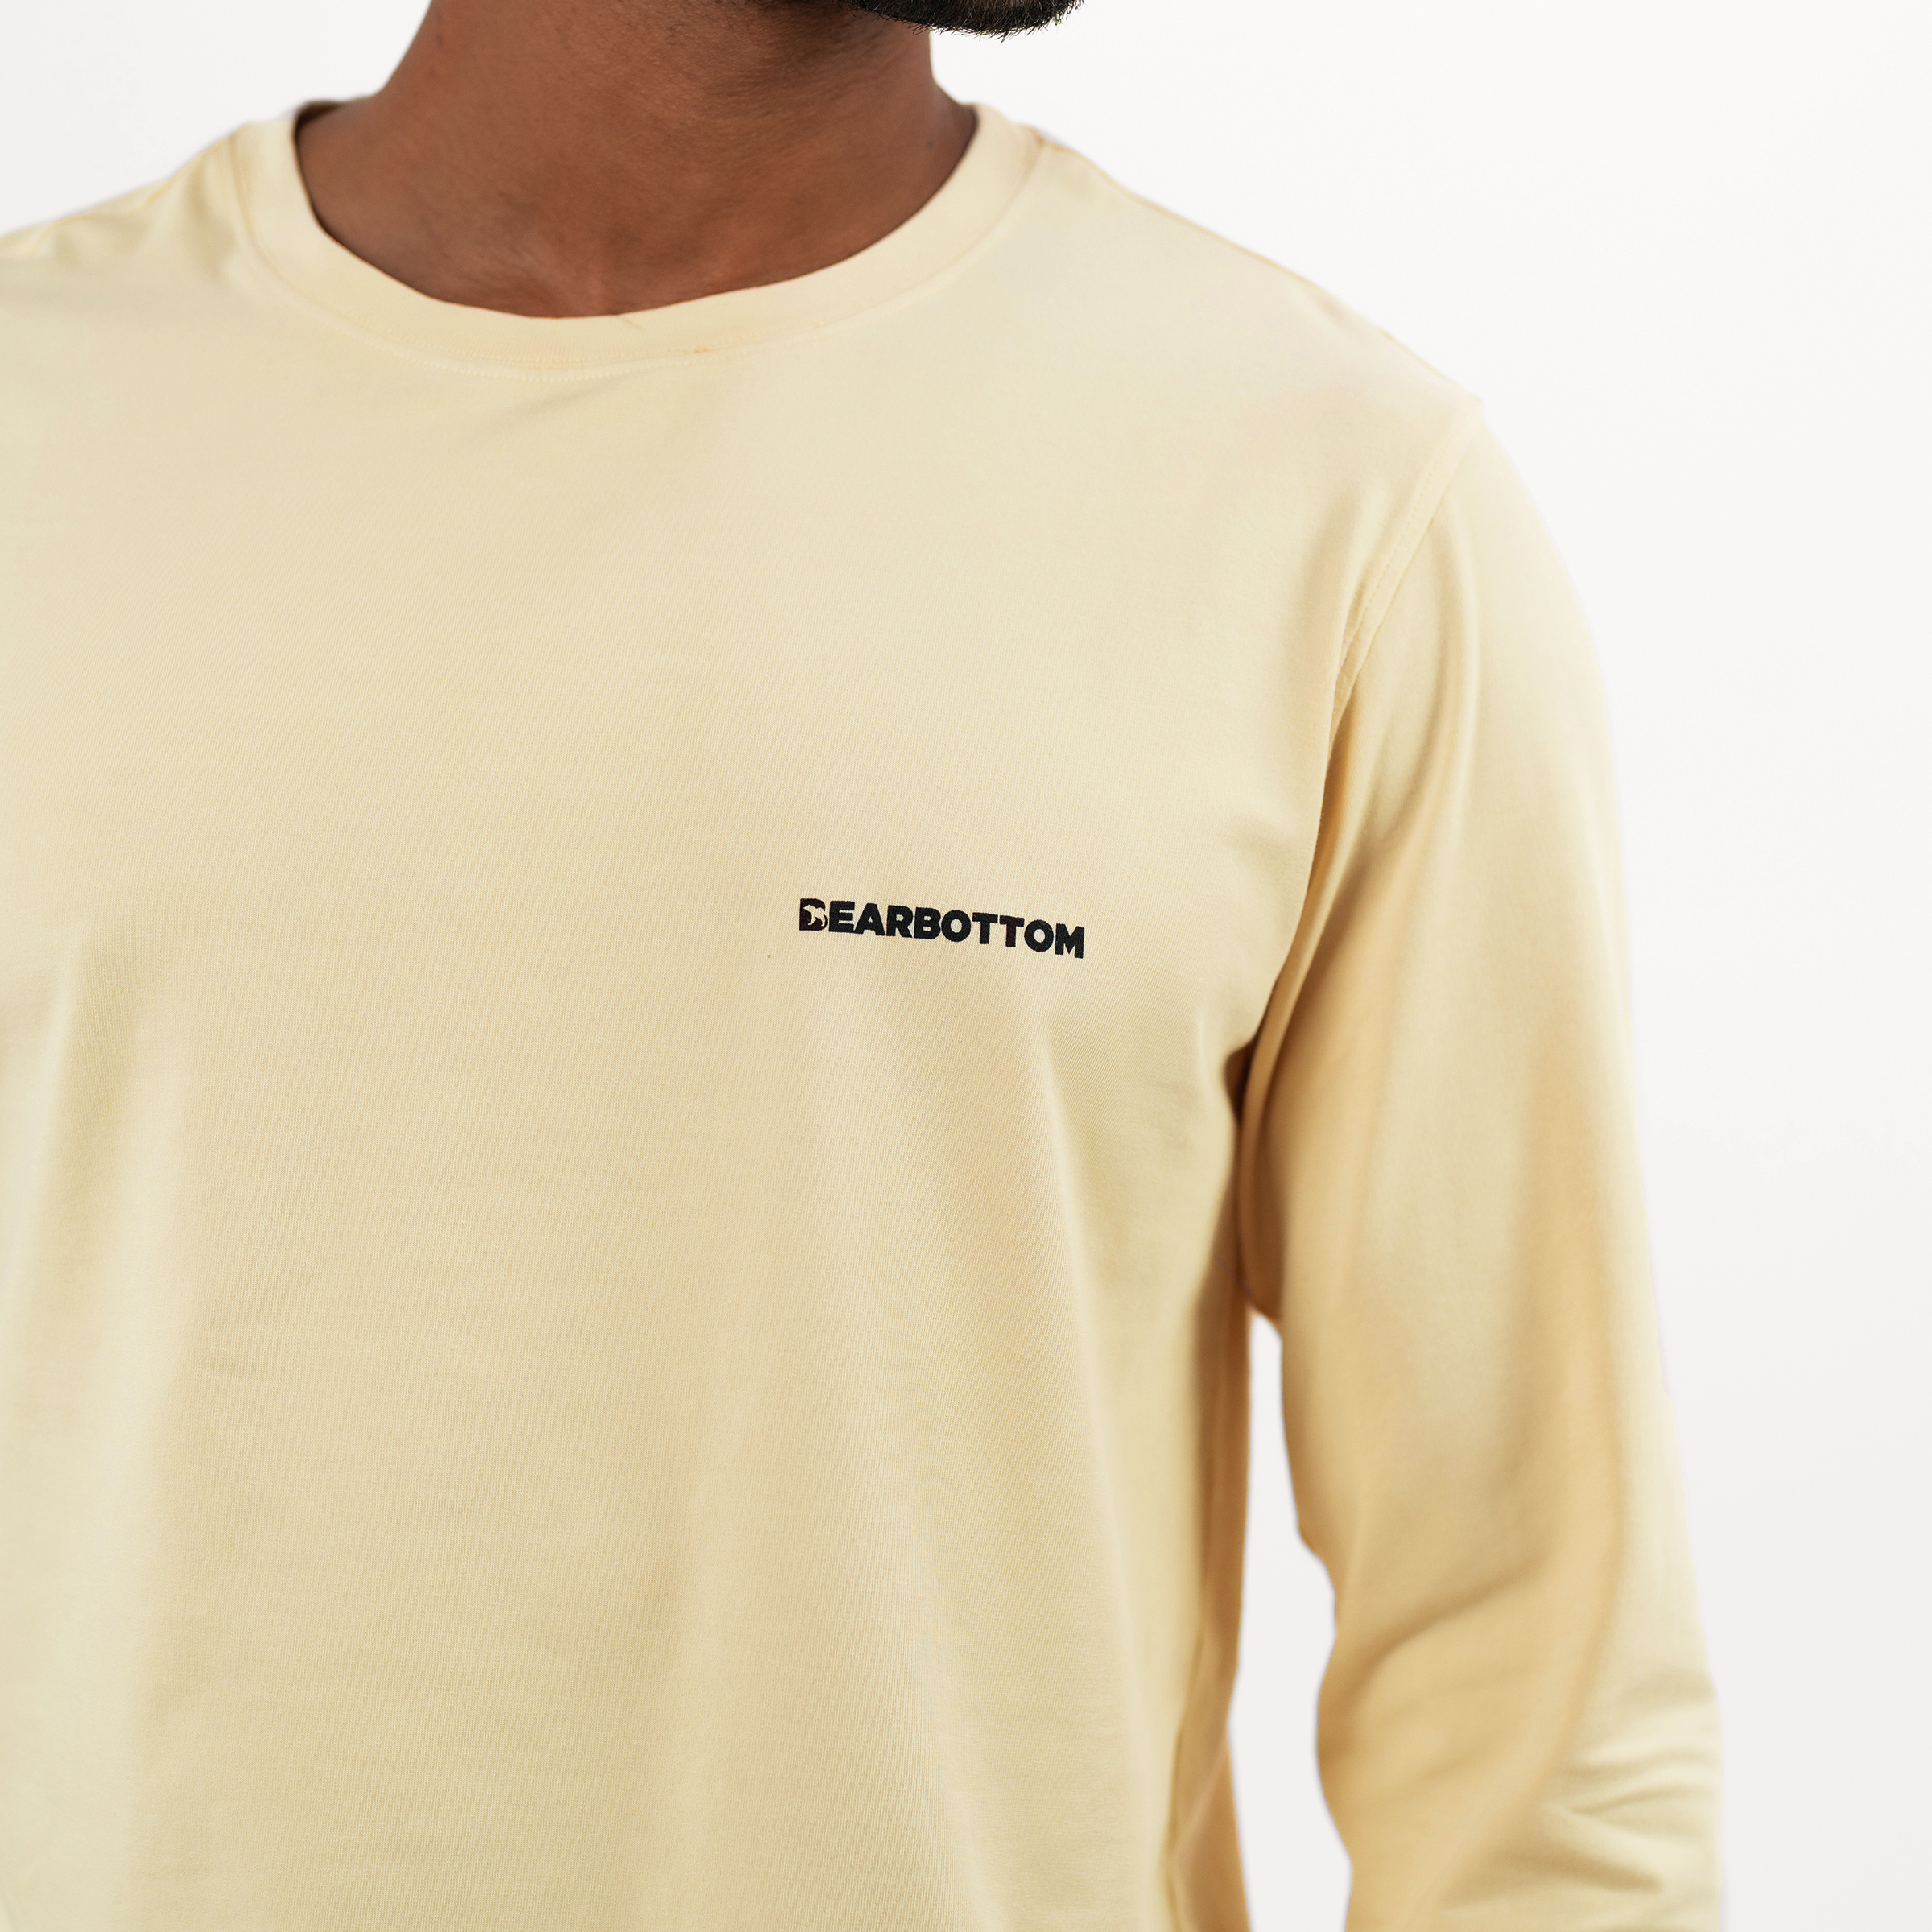 Natural Dye Logo Long Sleeve Tee in Sand yellow close up of Bearbottom logo on front left chest